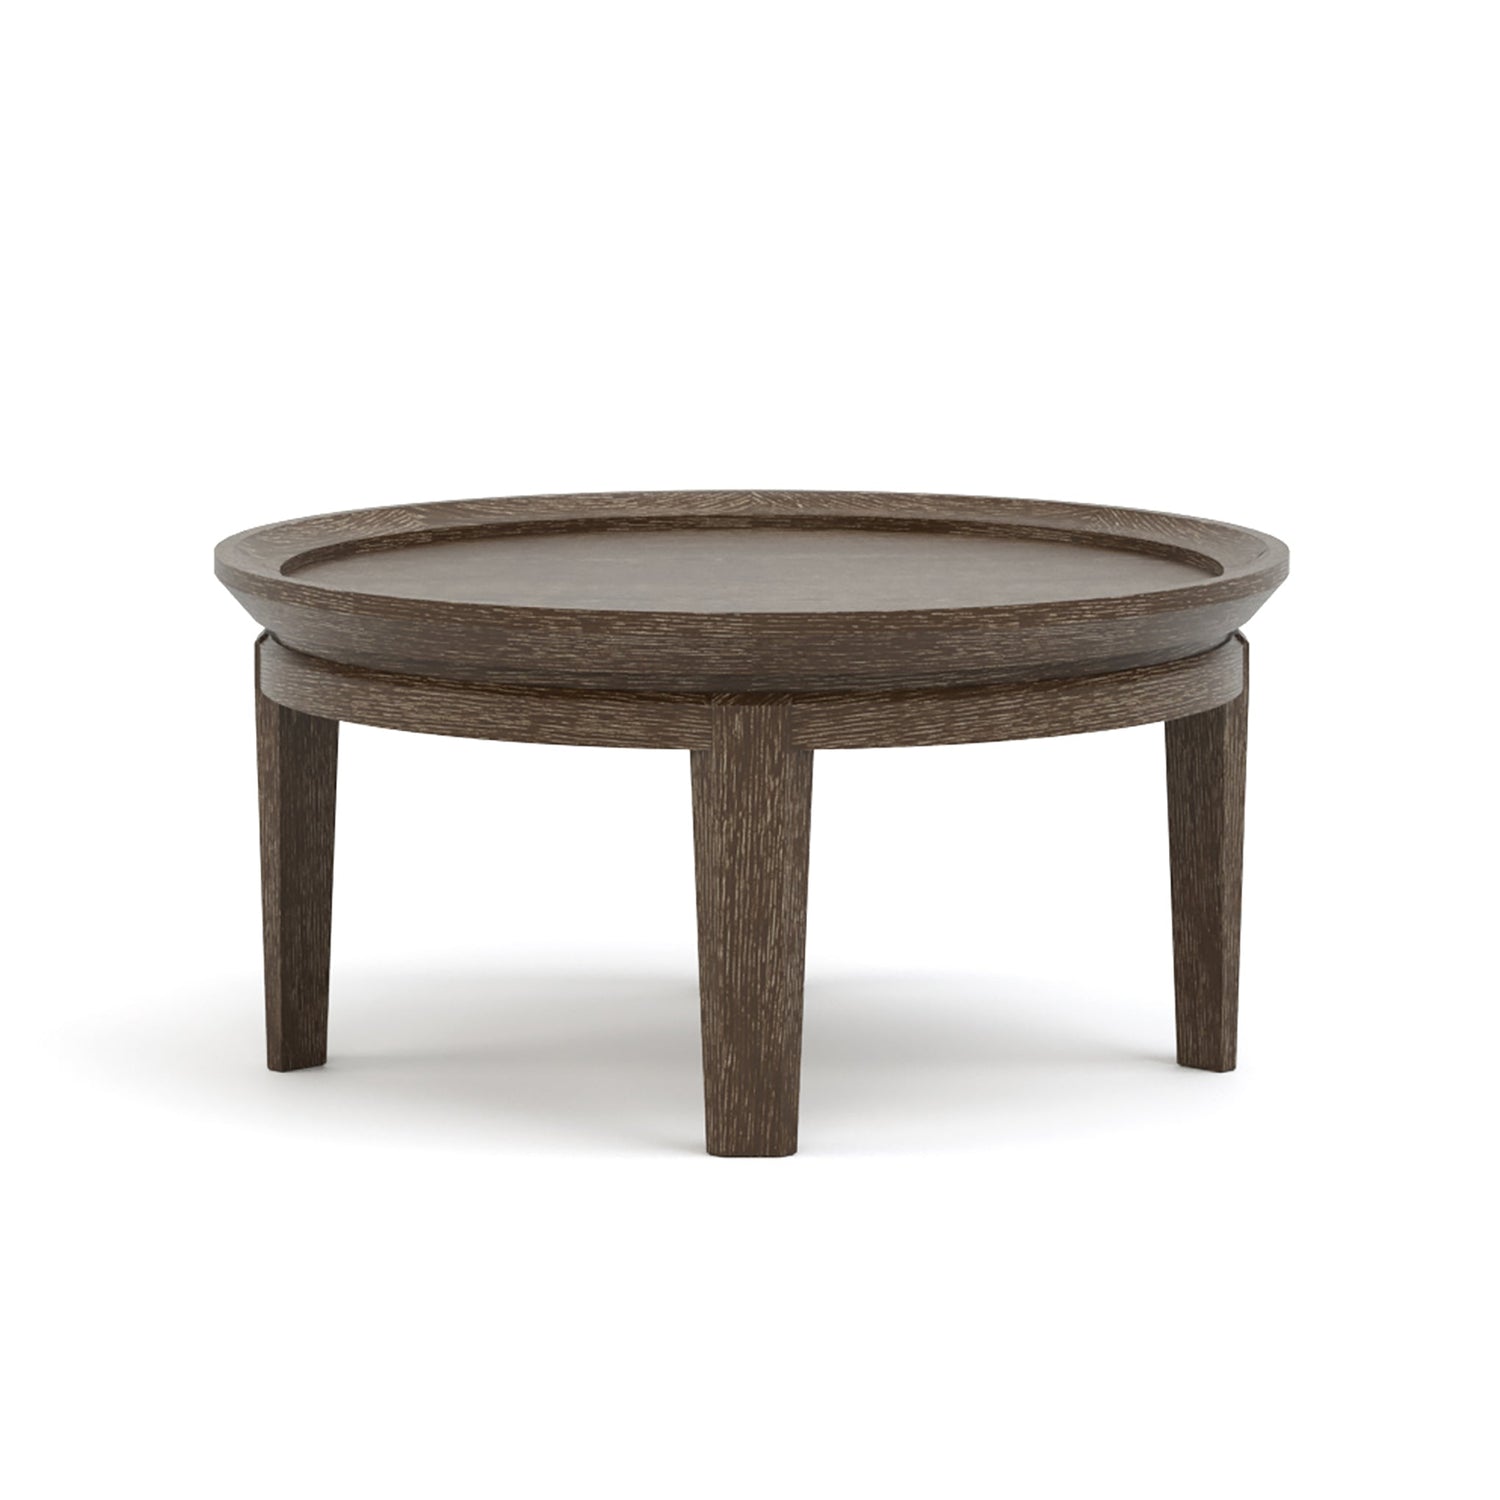 Maidstone 28-inch Round Cocktail Table in 202 Pier finish